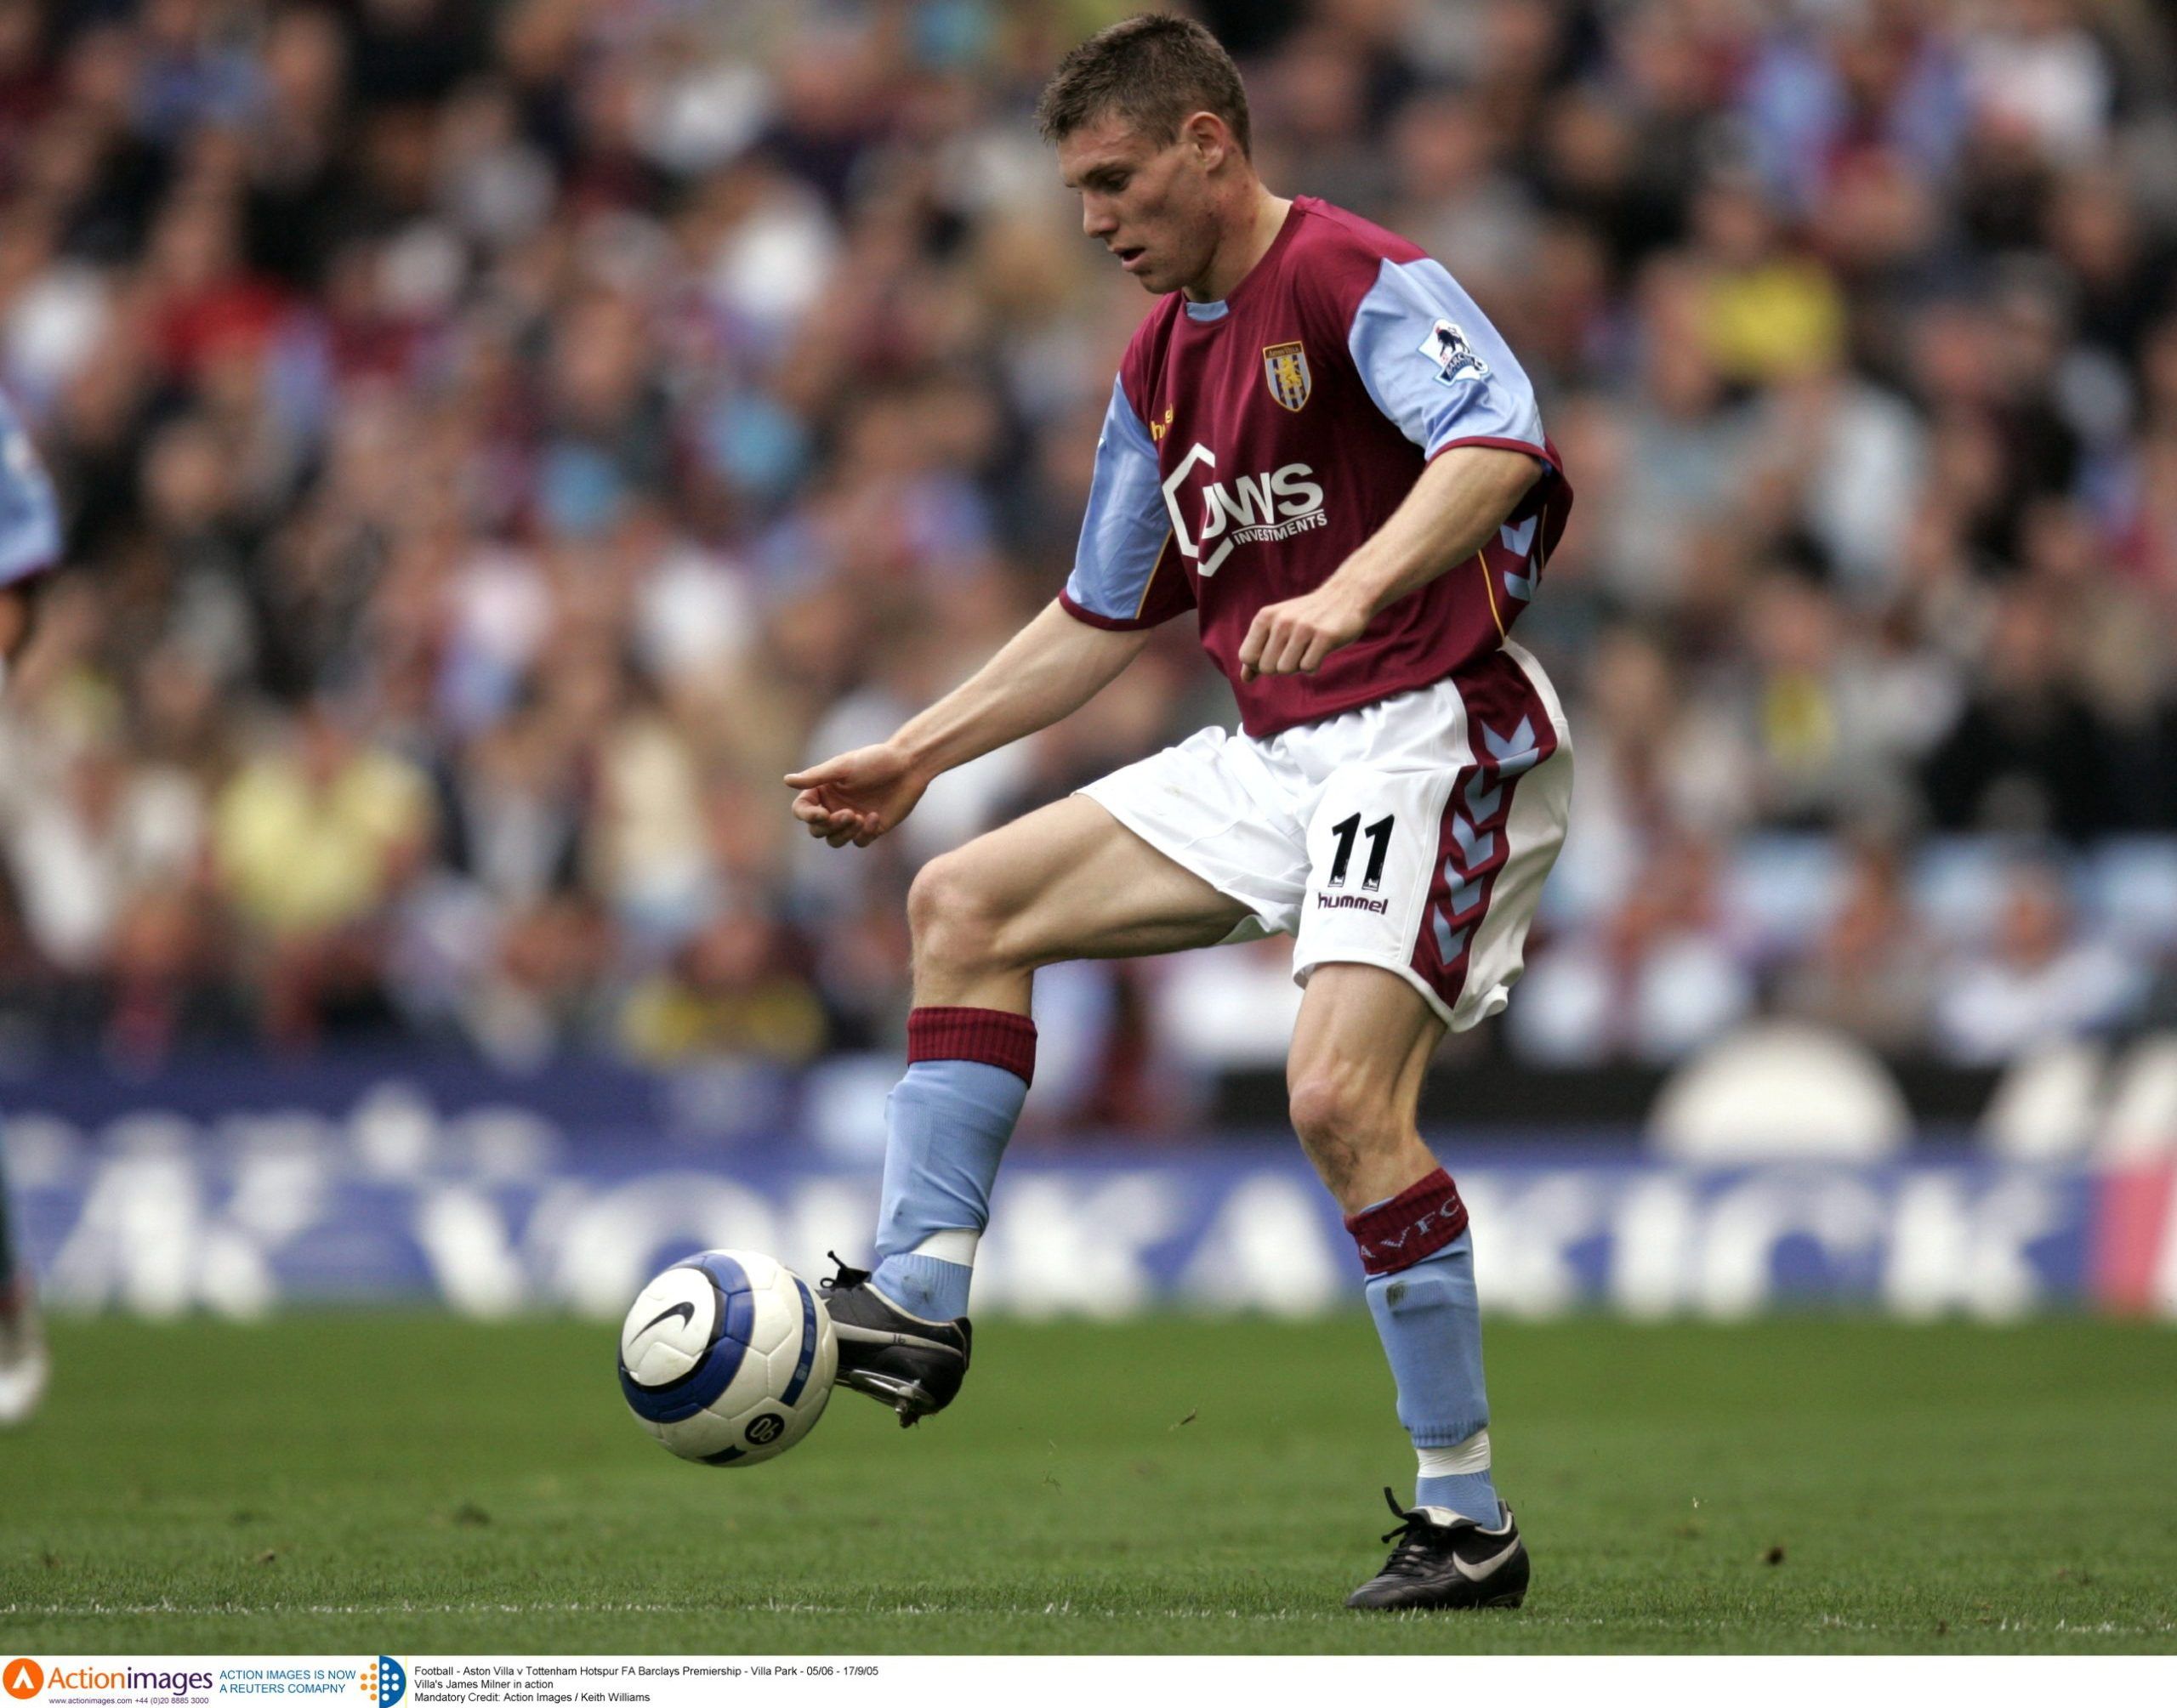 Football - Aston Villa v Tottenham Hotspur FA Barclays Premiership - Villa Park - 05/06 - 17/9/05 
Villa's James Milner in action 
Mandatory Credit: Action Images / Keith Williams 
NO ONLINE/INTERNET USE WITHOUT A LICENCE FROM THE FOOTBALL DATA CO LTD. FOR LICENCE ENQUIRIES PLEASE TELEPHONE +44 207 298 1656.